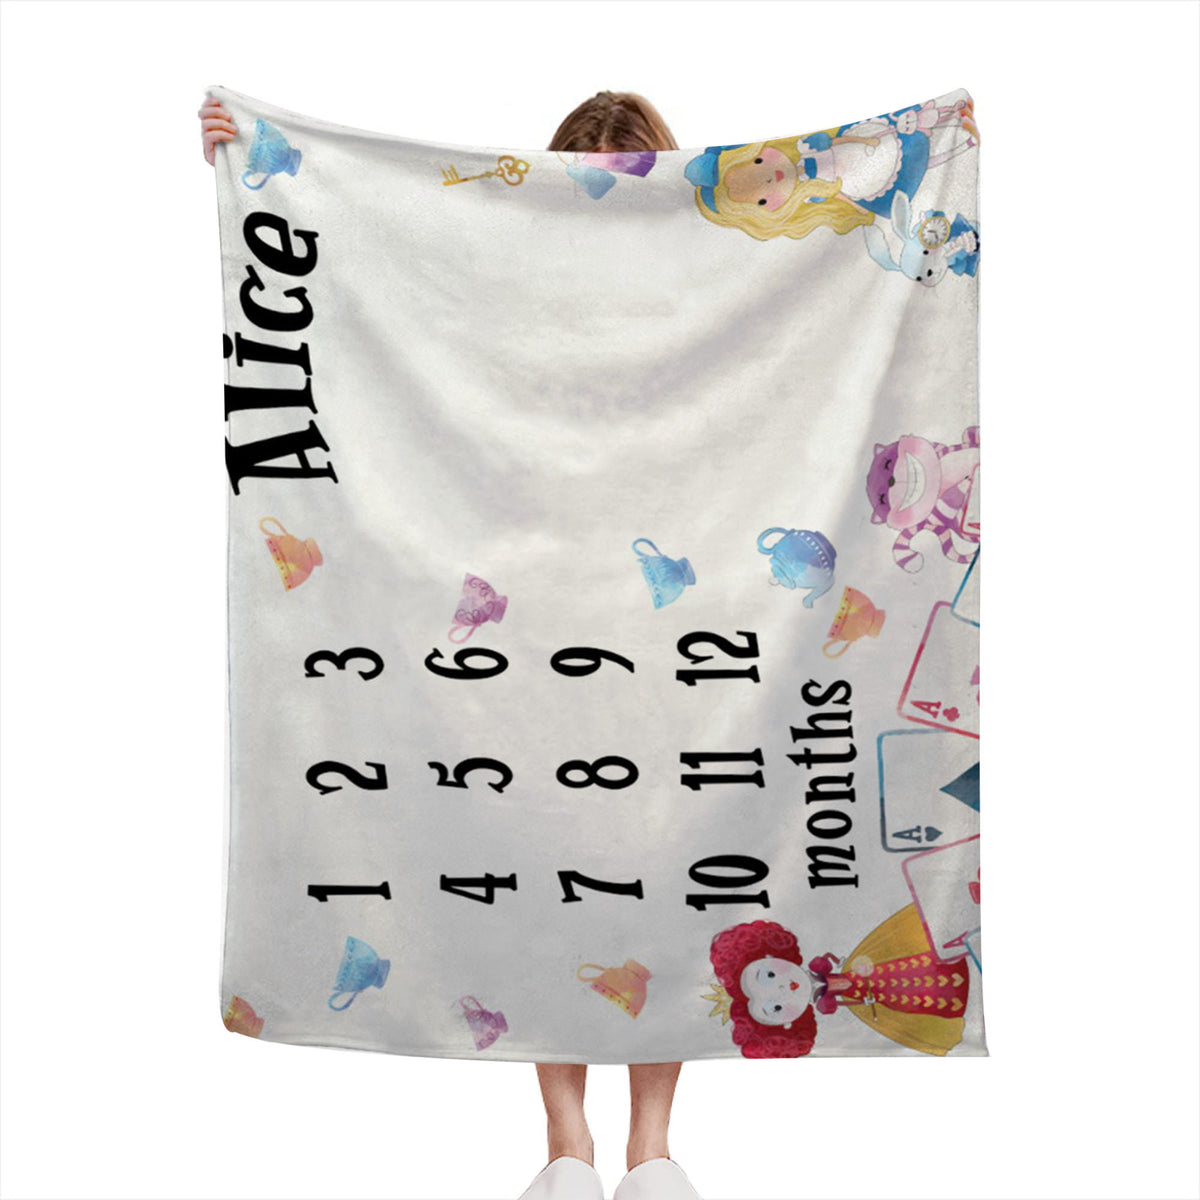 Personalized Girls Cup Tea Month Blanket With Name For Adult, Kids